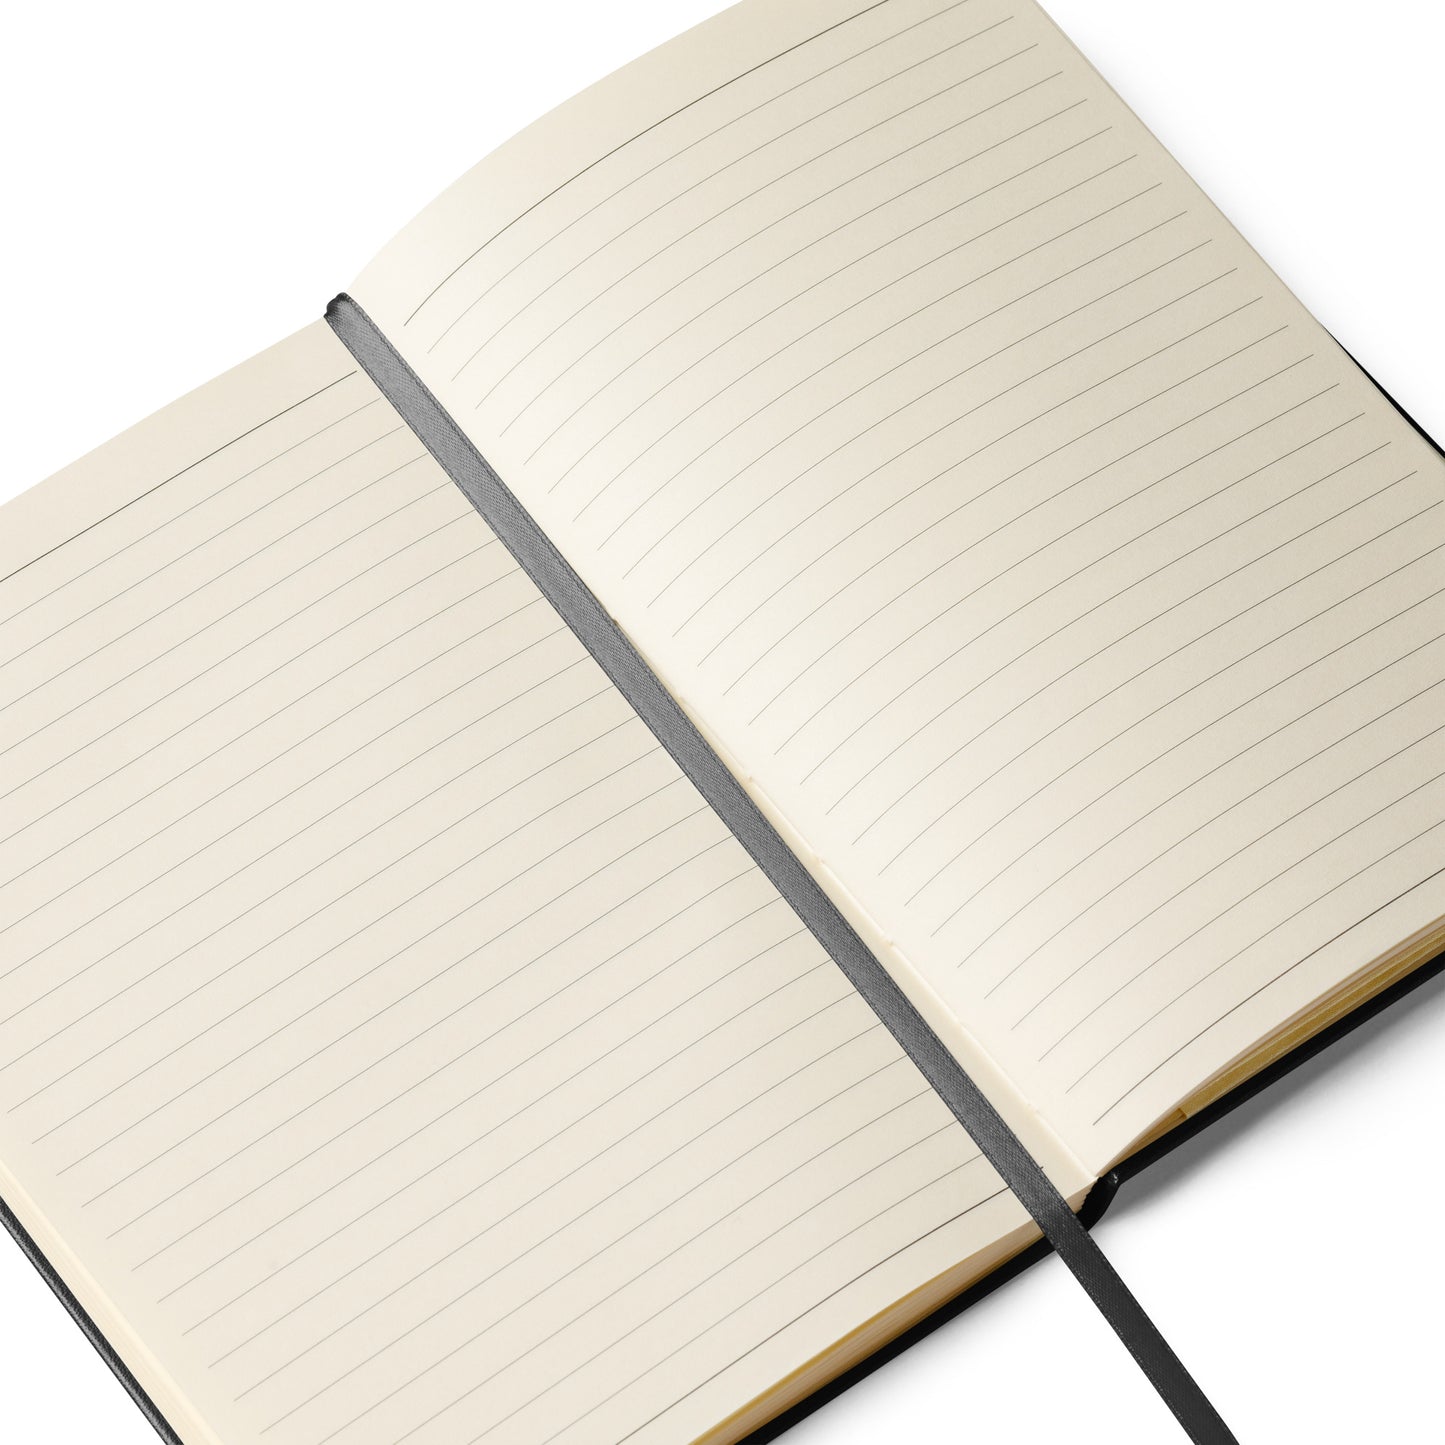 SOLIHULL’S Notebook